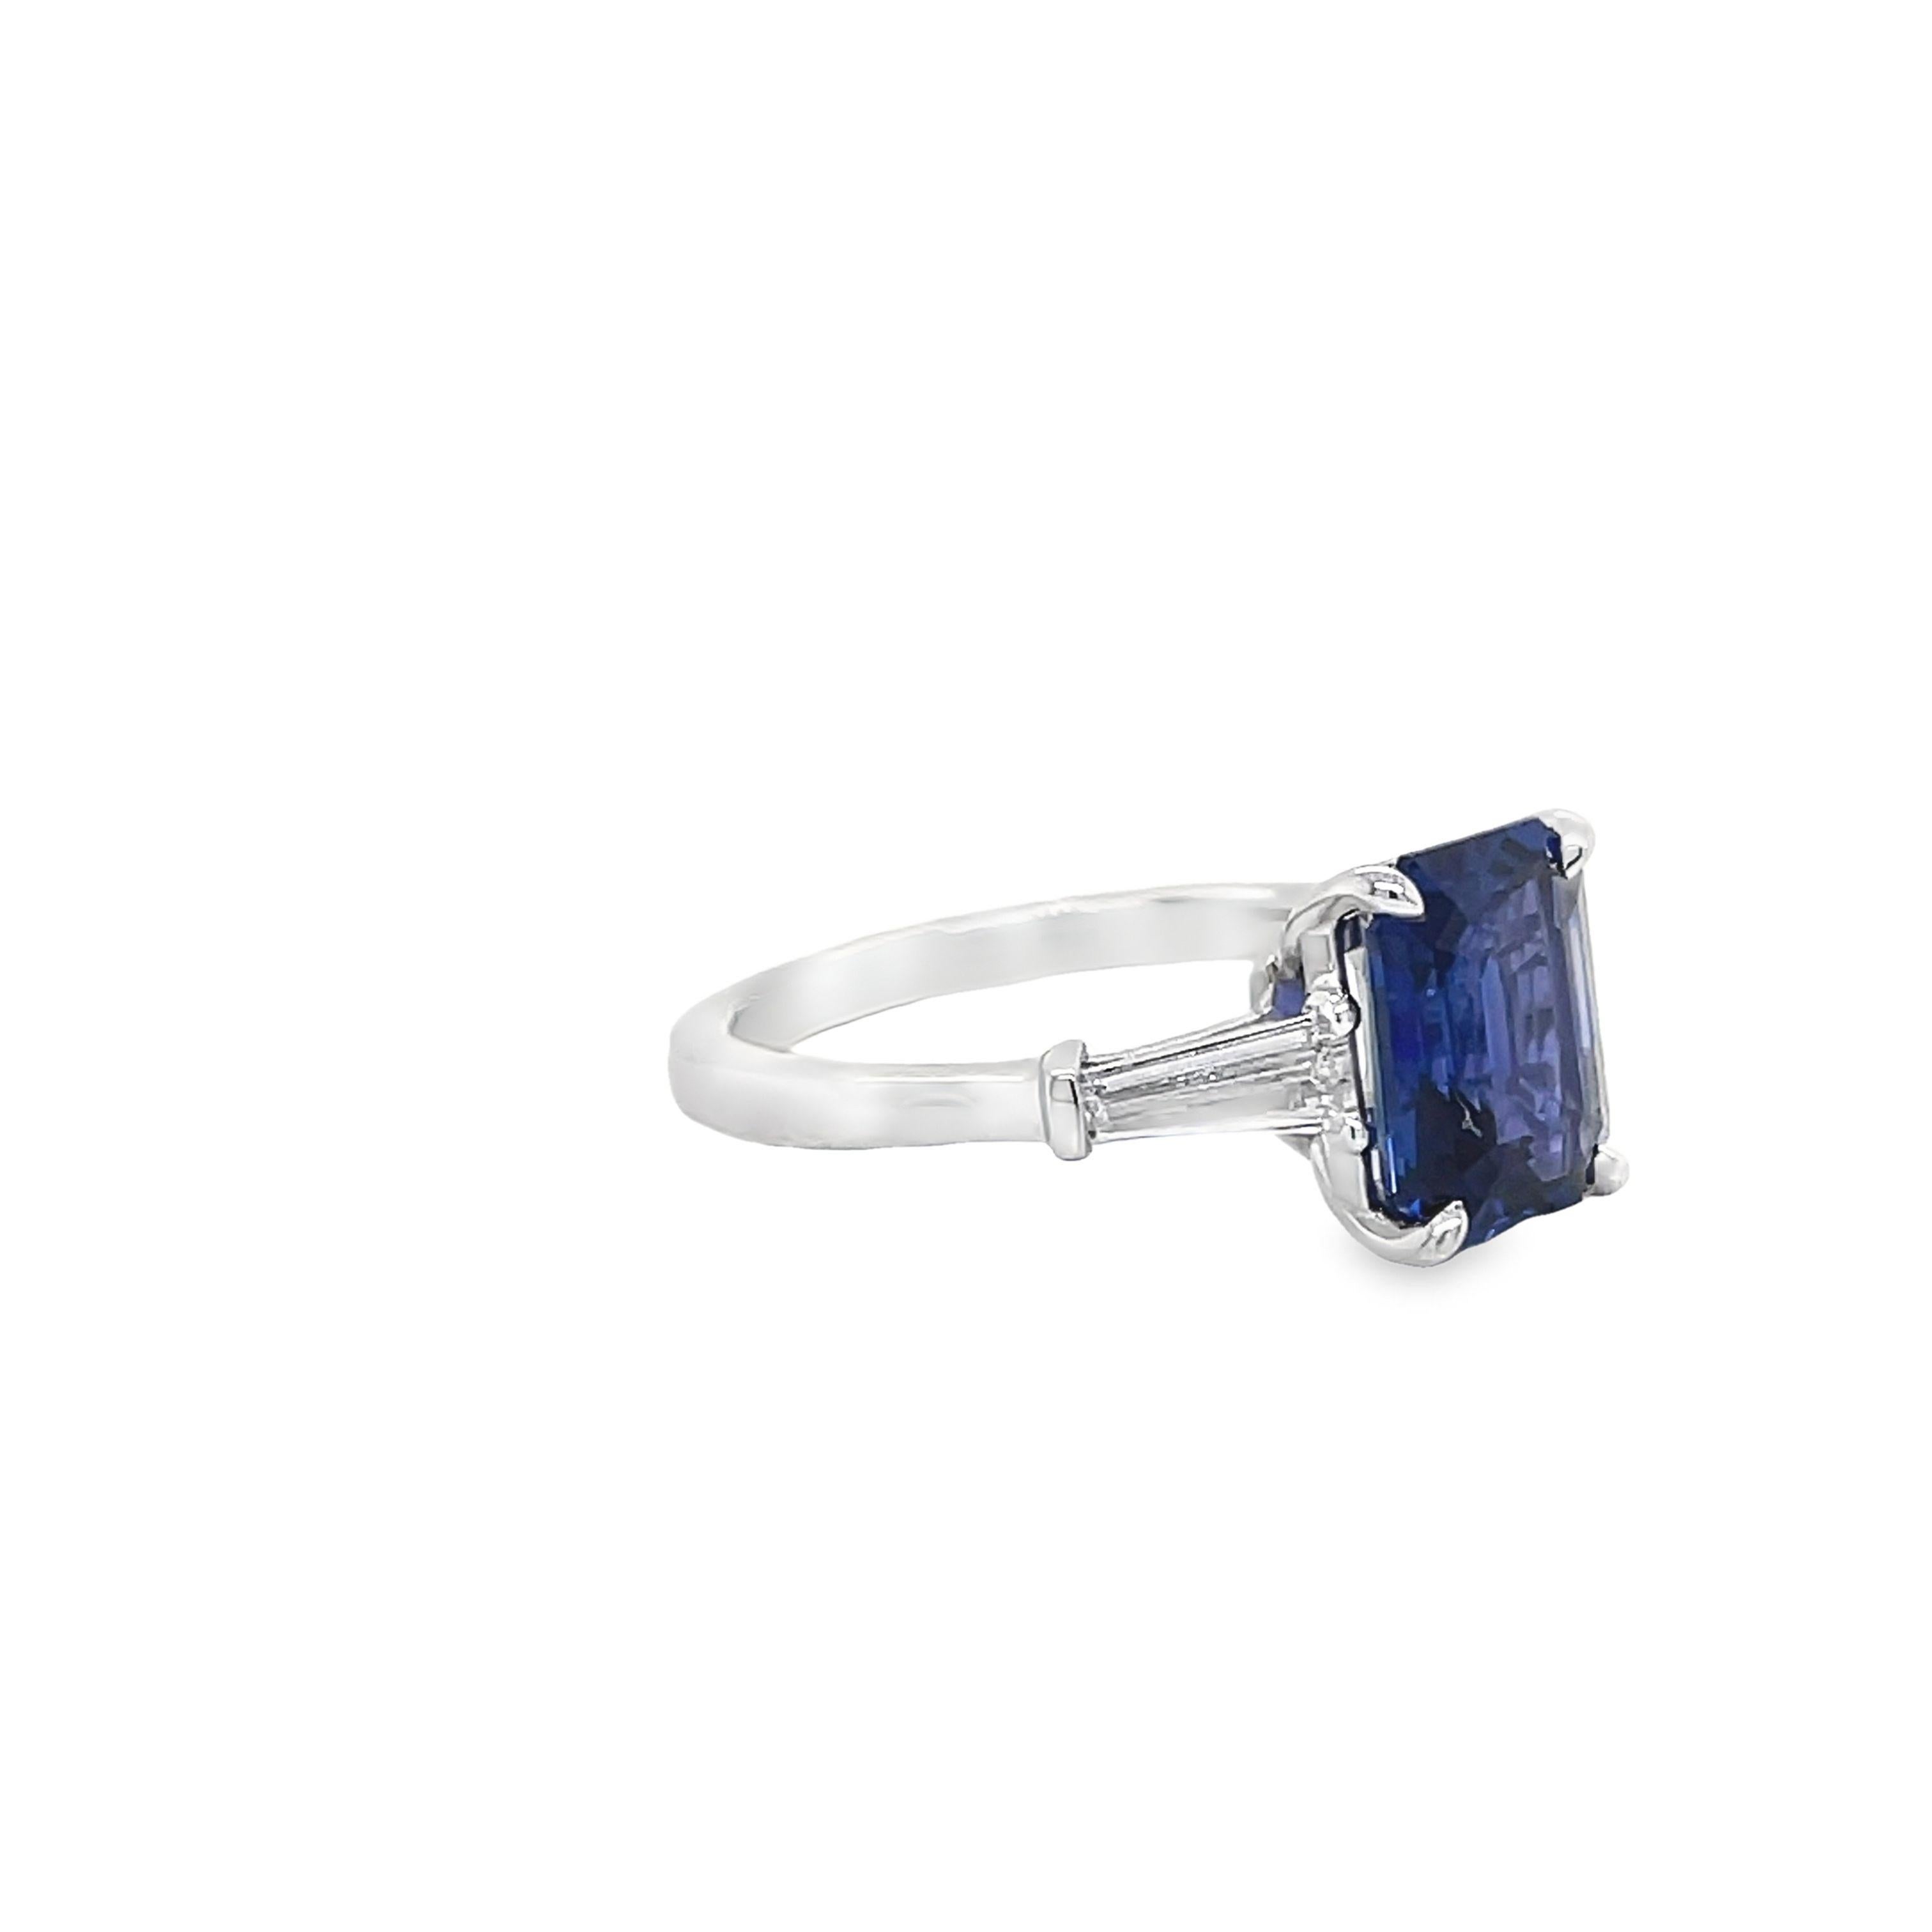 Ring contains one GIA certified emerald cut sapphire 3.23ct and 2 side baguette diamonds 0.45tcw. Sapphire and diamonds are mounted in a handmade basket prong setting. Sapphire originates from Sri Lanka. Diamonds are G in color and VS2 in clarity.